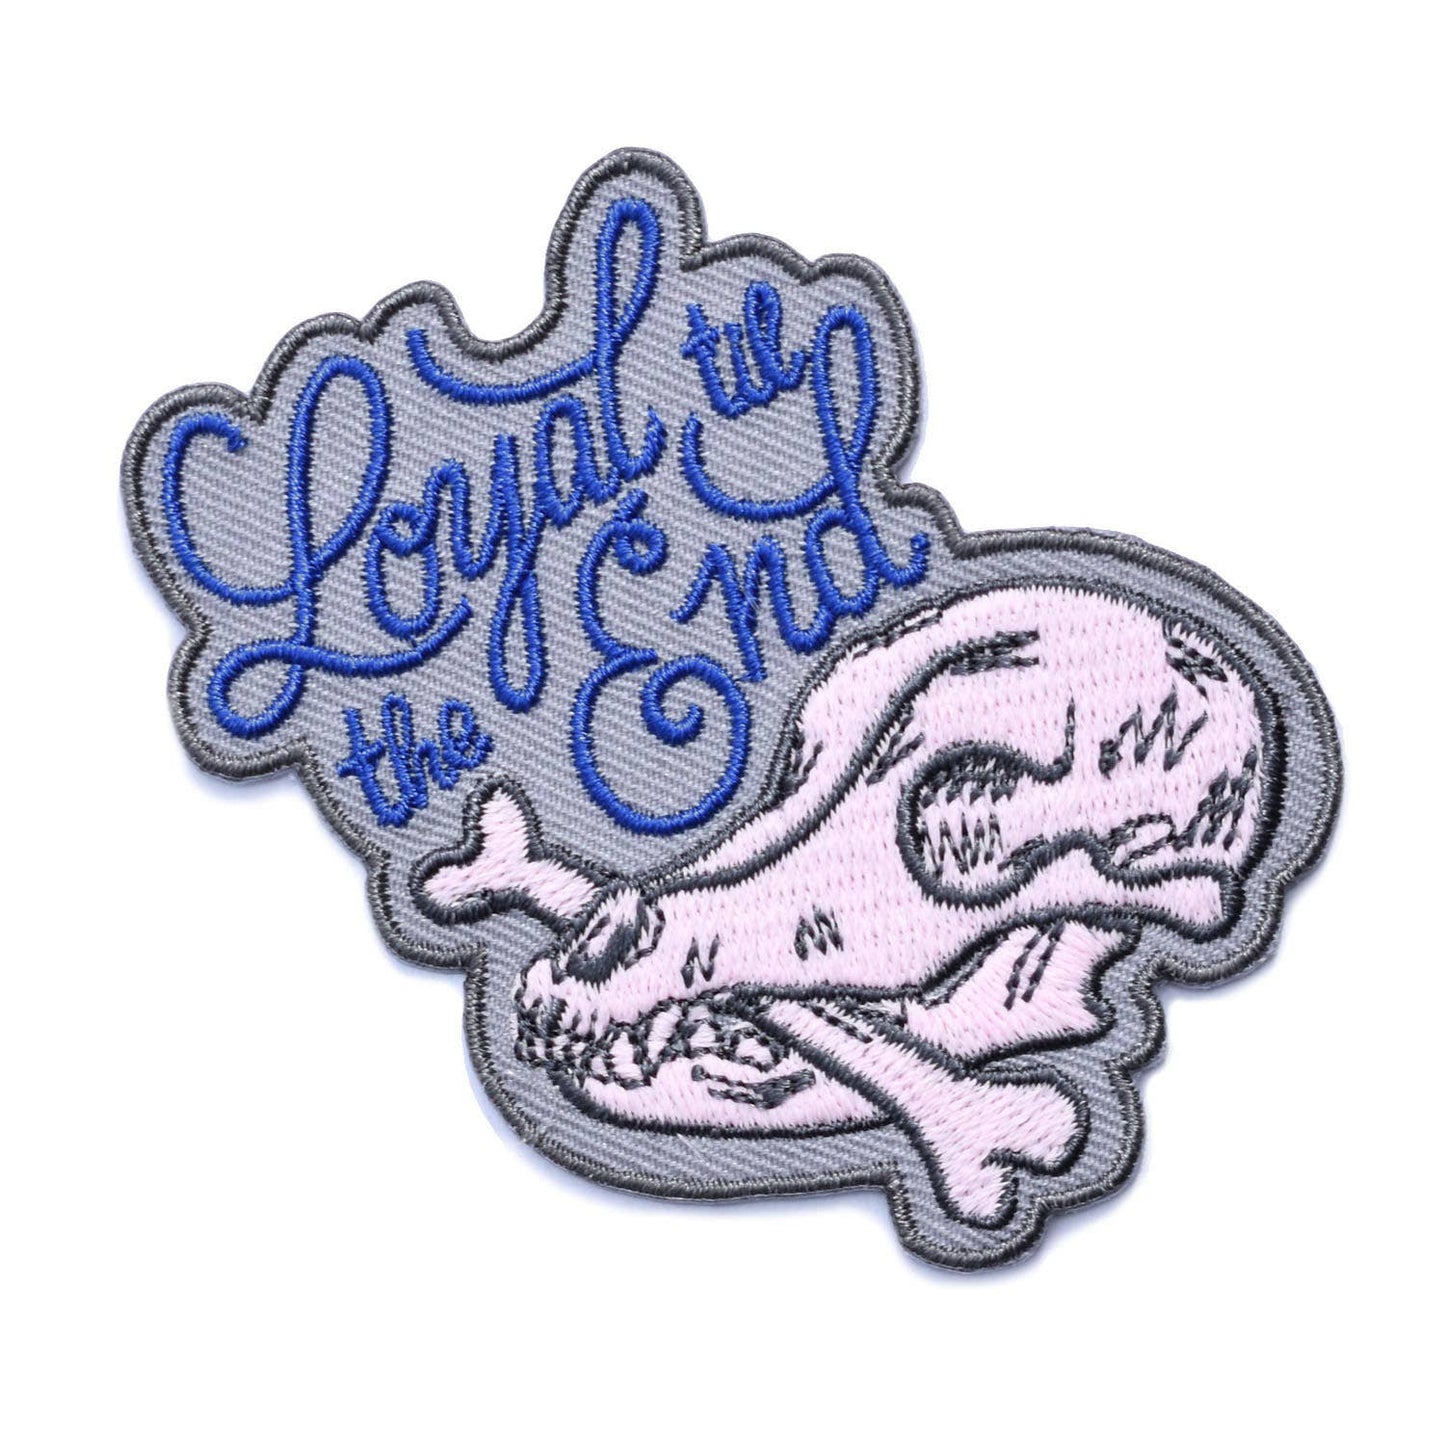 Loyal til the End (Glow in the Dark!) Patch